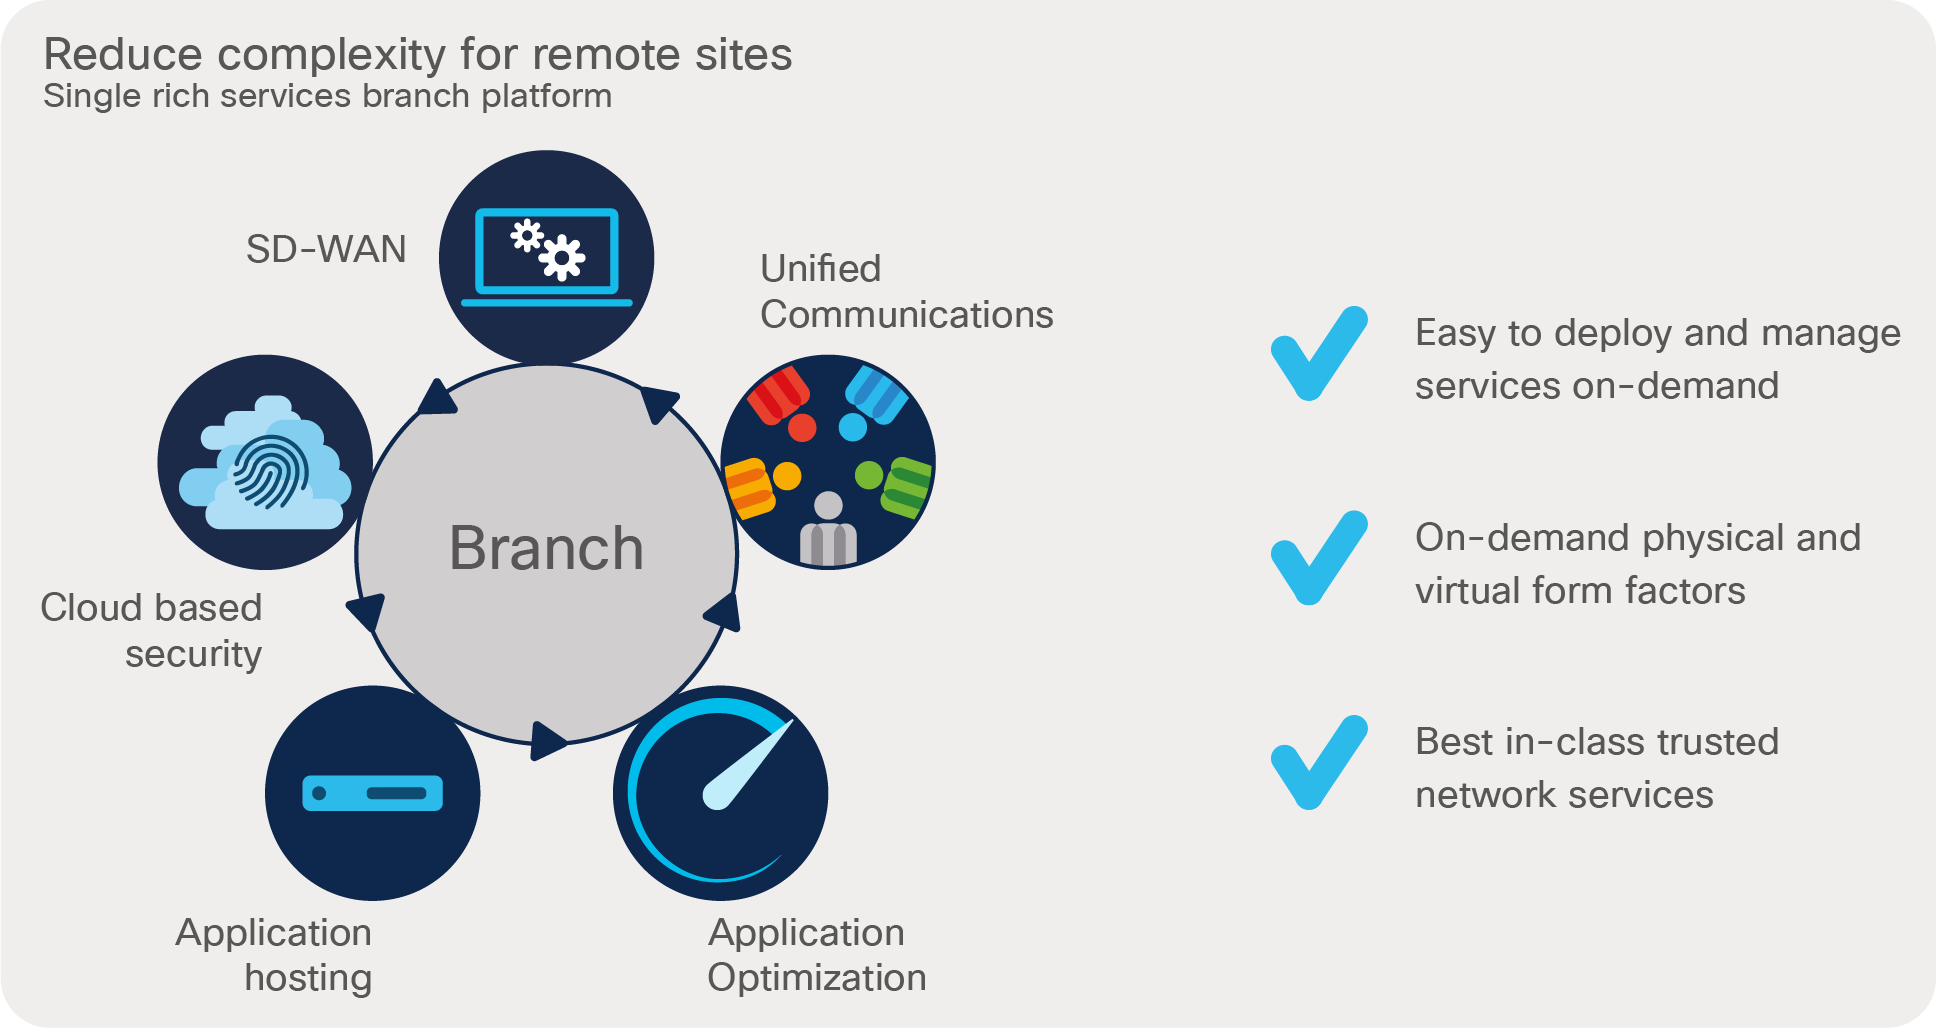 Cisco SD-WAN can reduce the complexity of remote sites